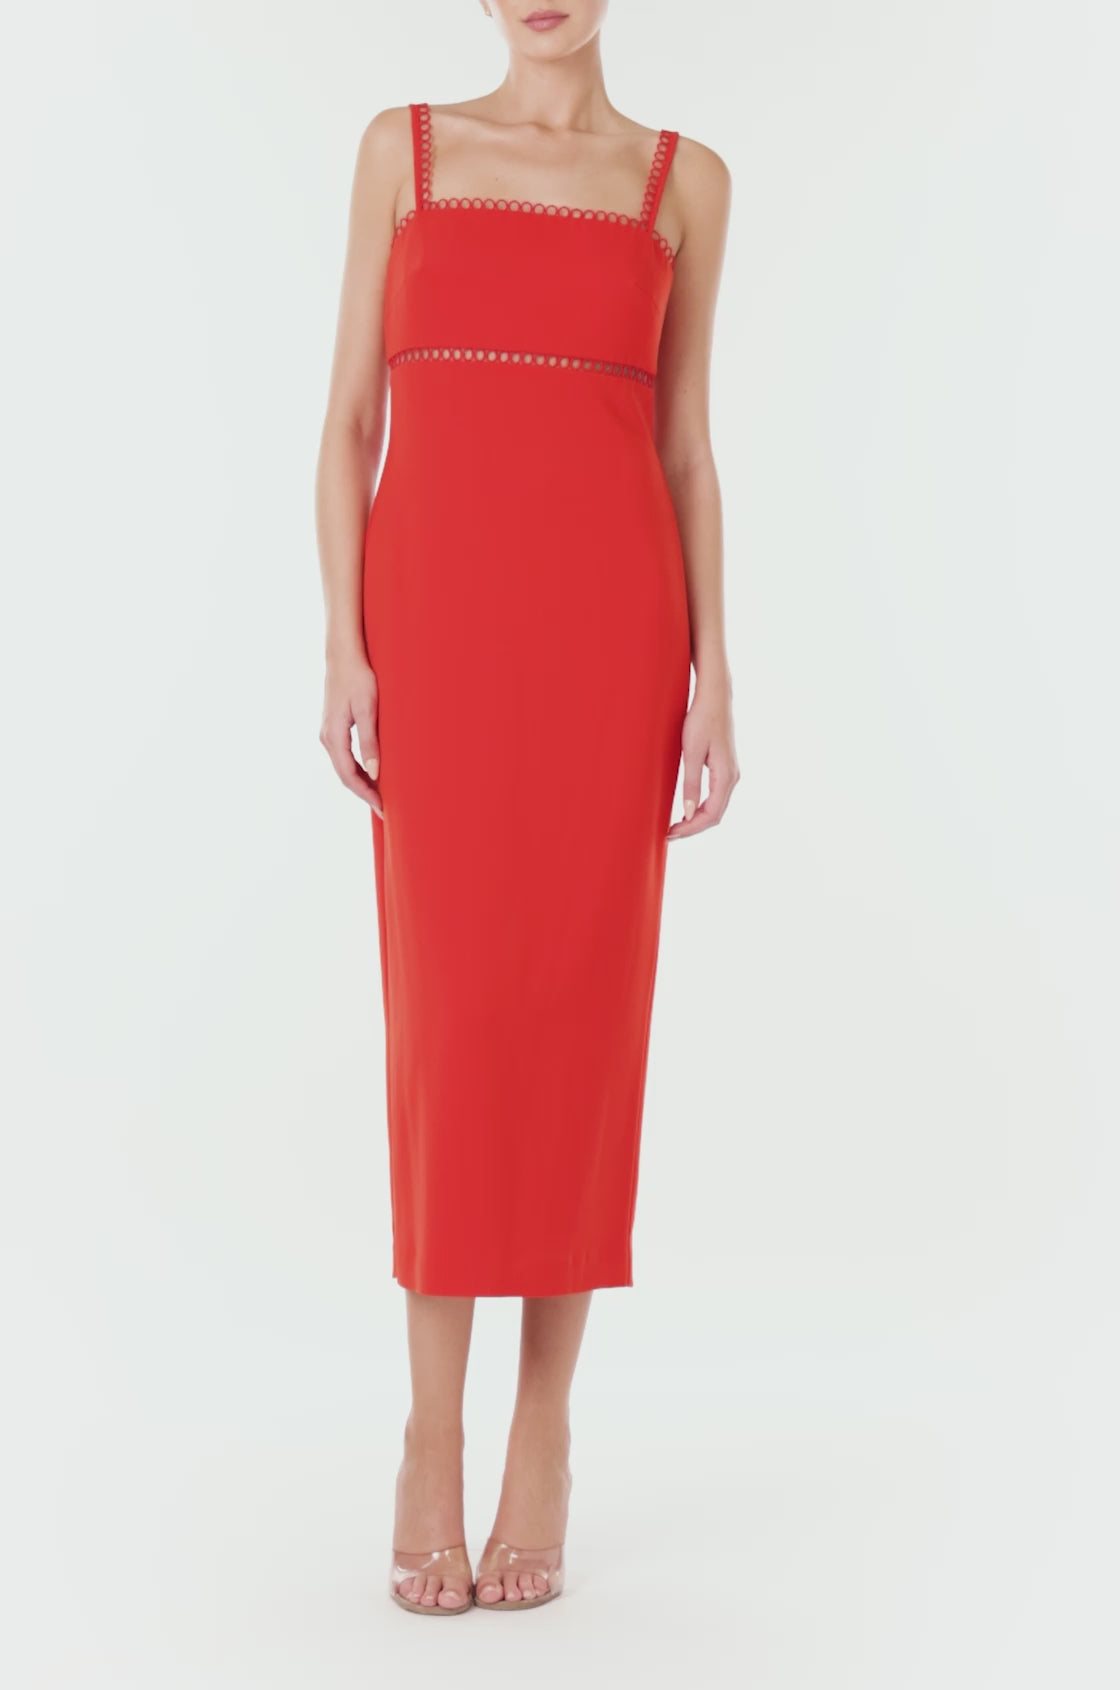 ML Monique Lhuillier red crepe dress with straps, eyelet embroidery and waist cutout.